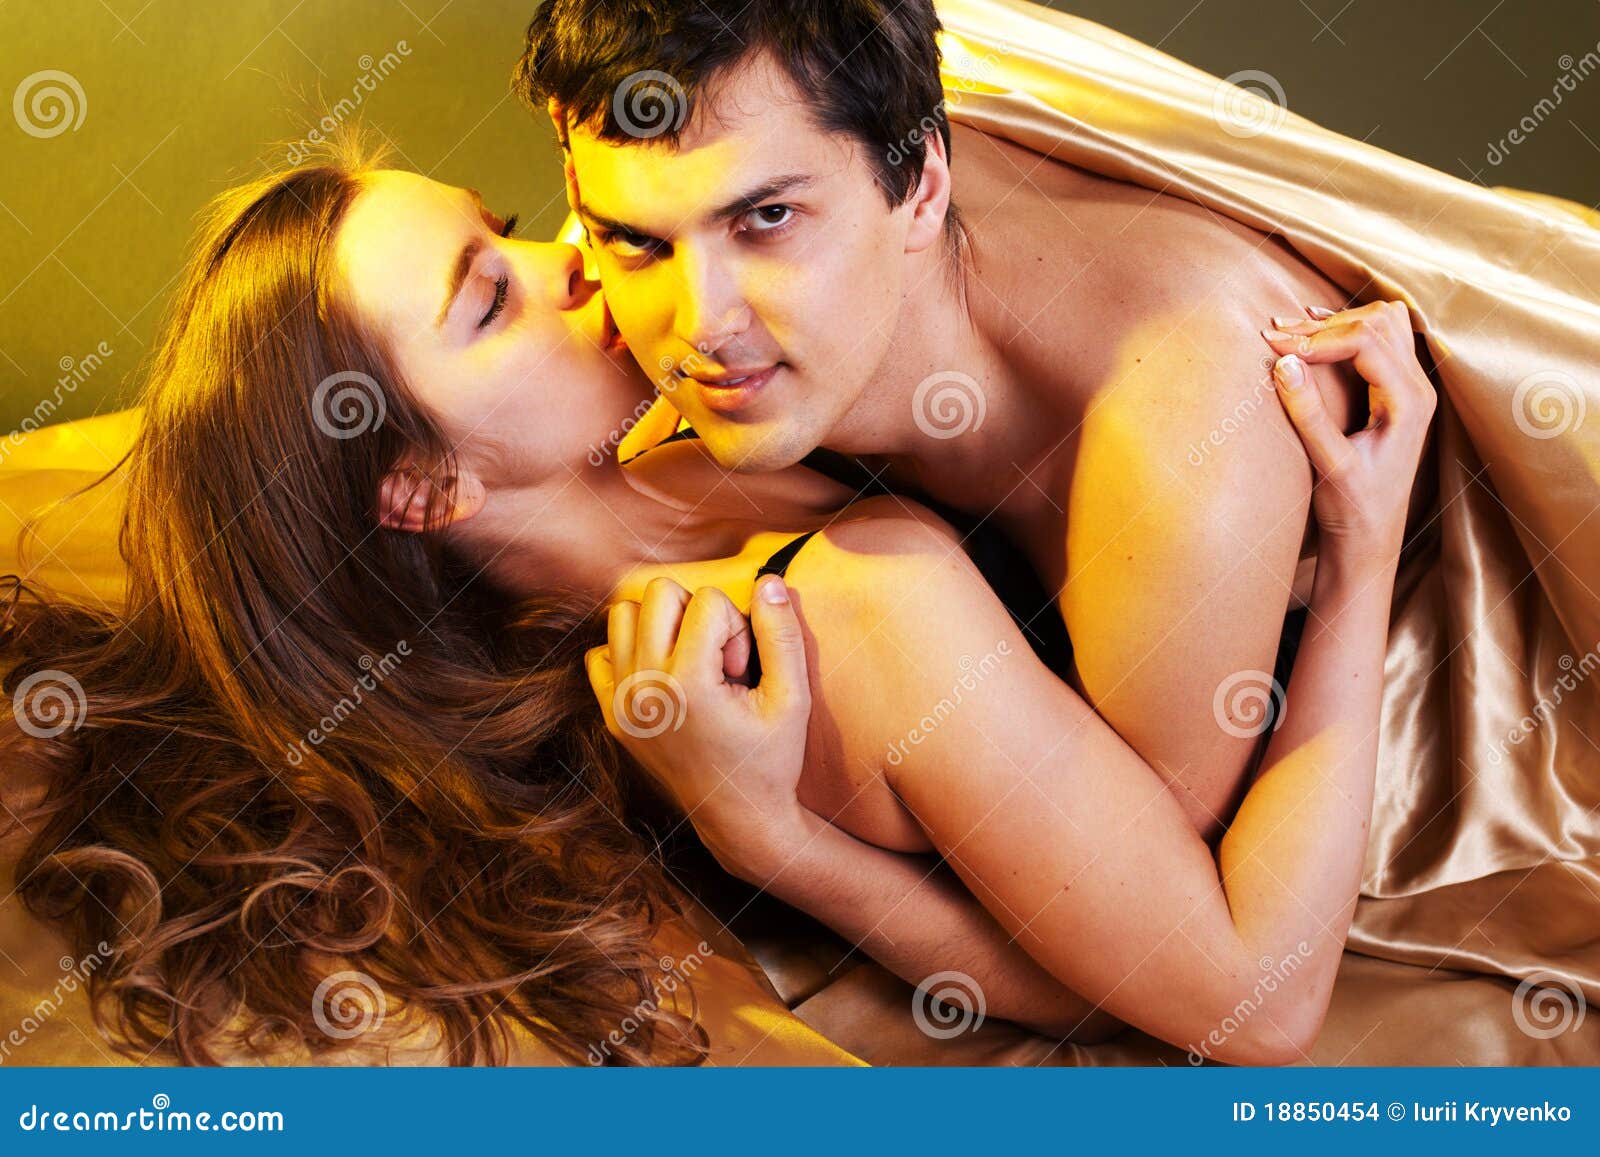 audrey malcolm add pictures of couples making love photo